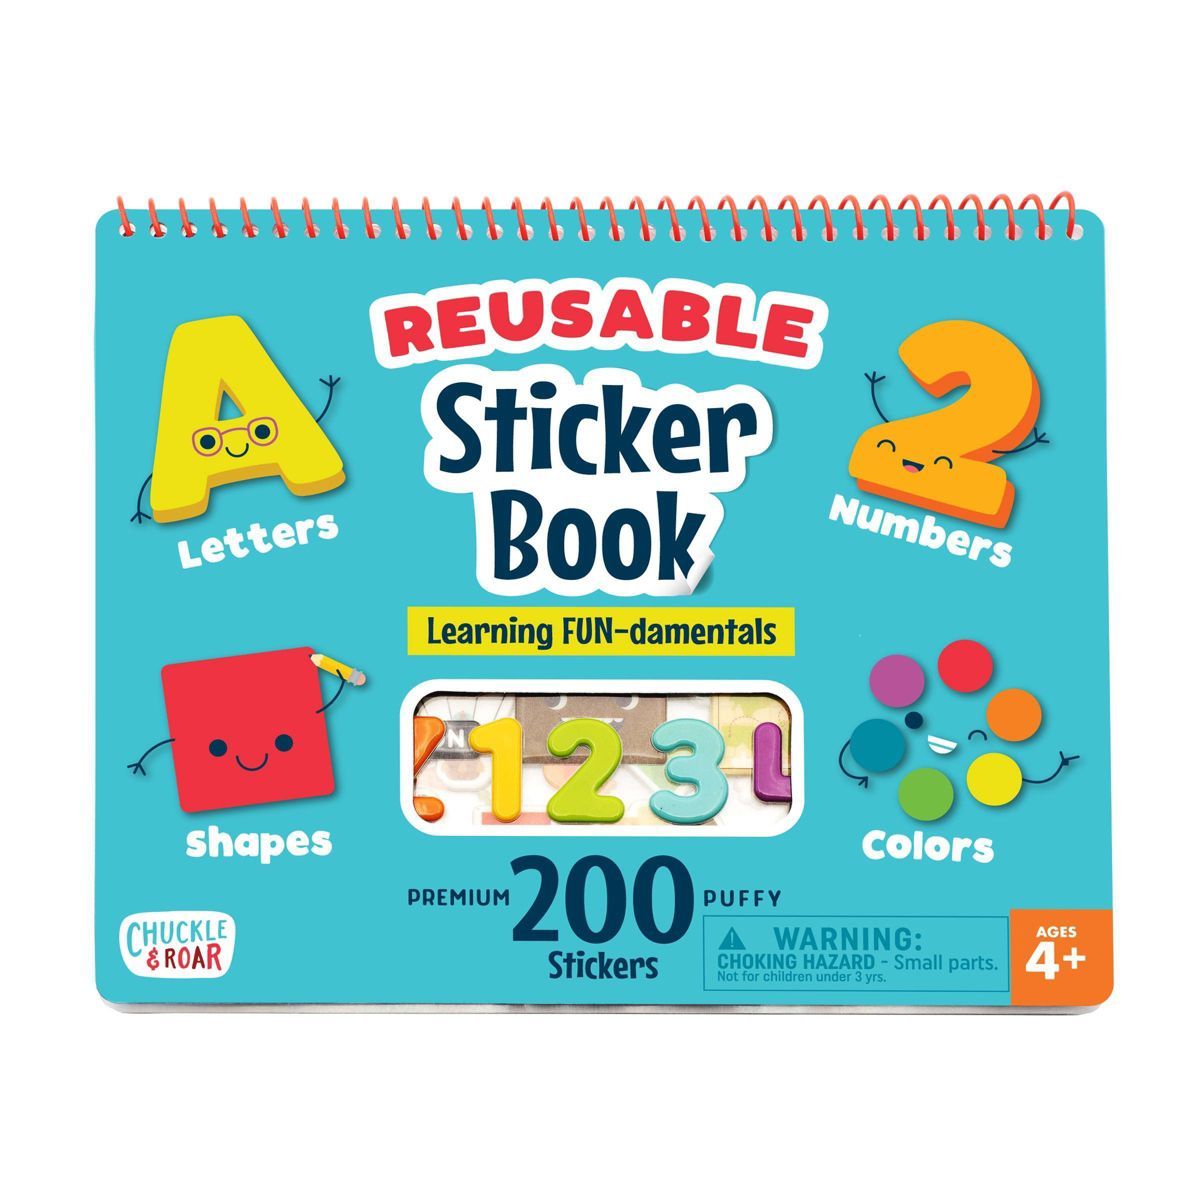 Reusable Sticker Learning & Activity Book with 200 Premium Puffy Stickers - Chuckle & Roar | Target